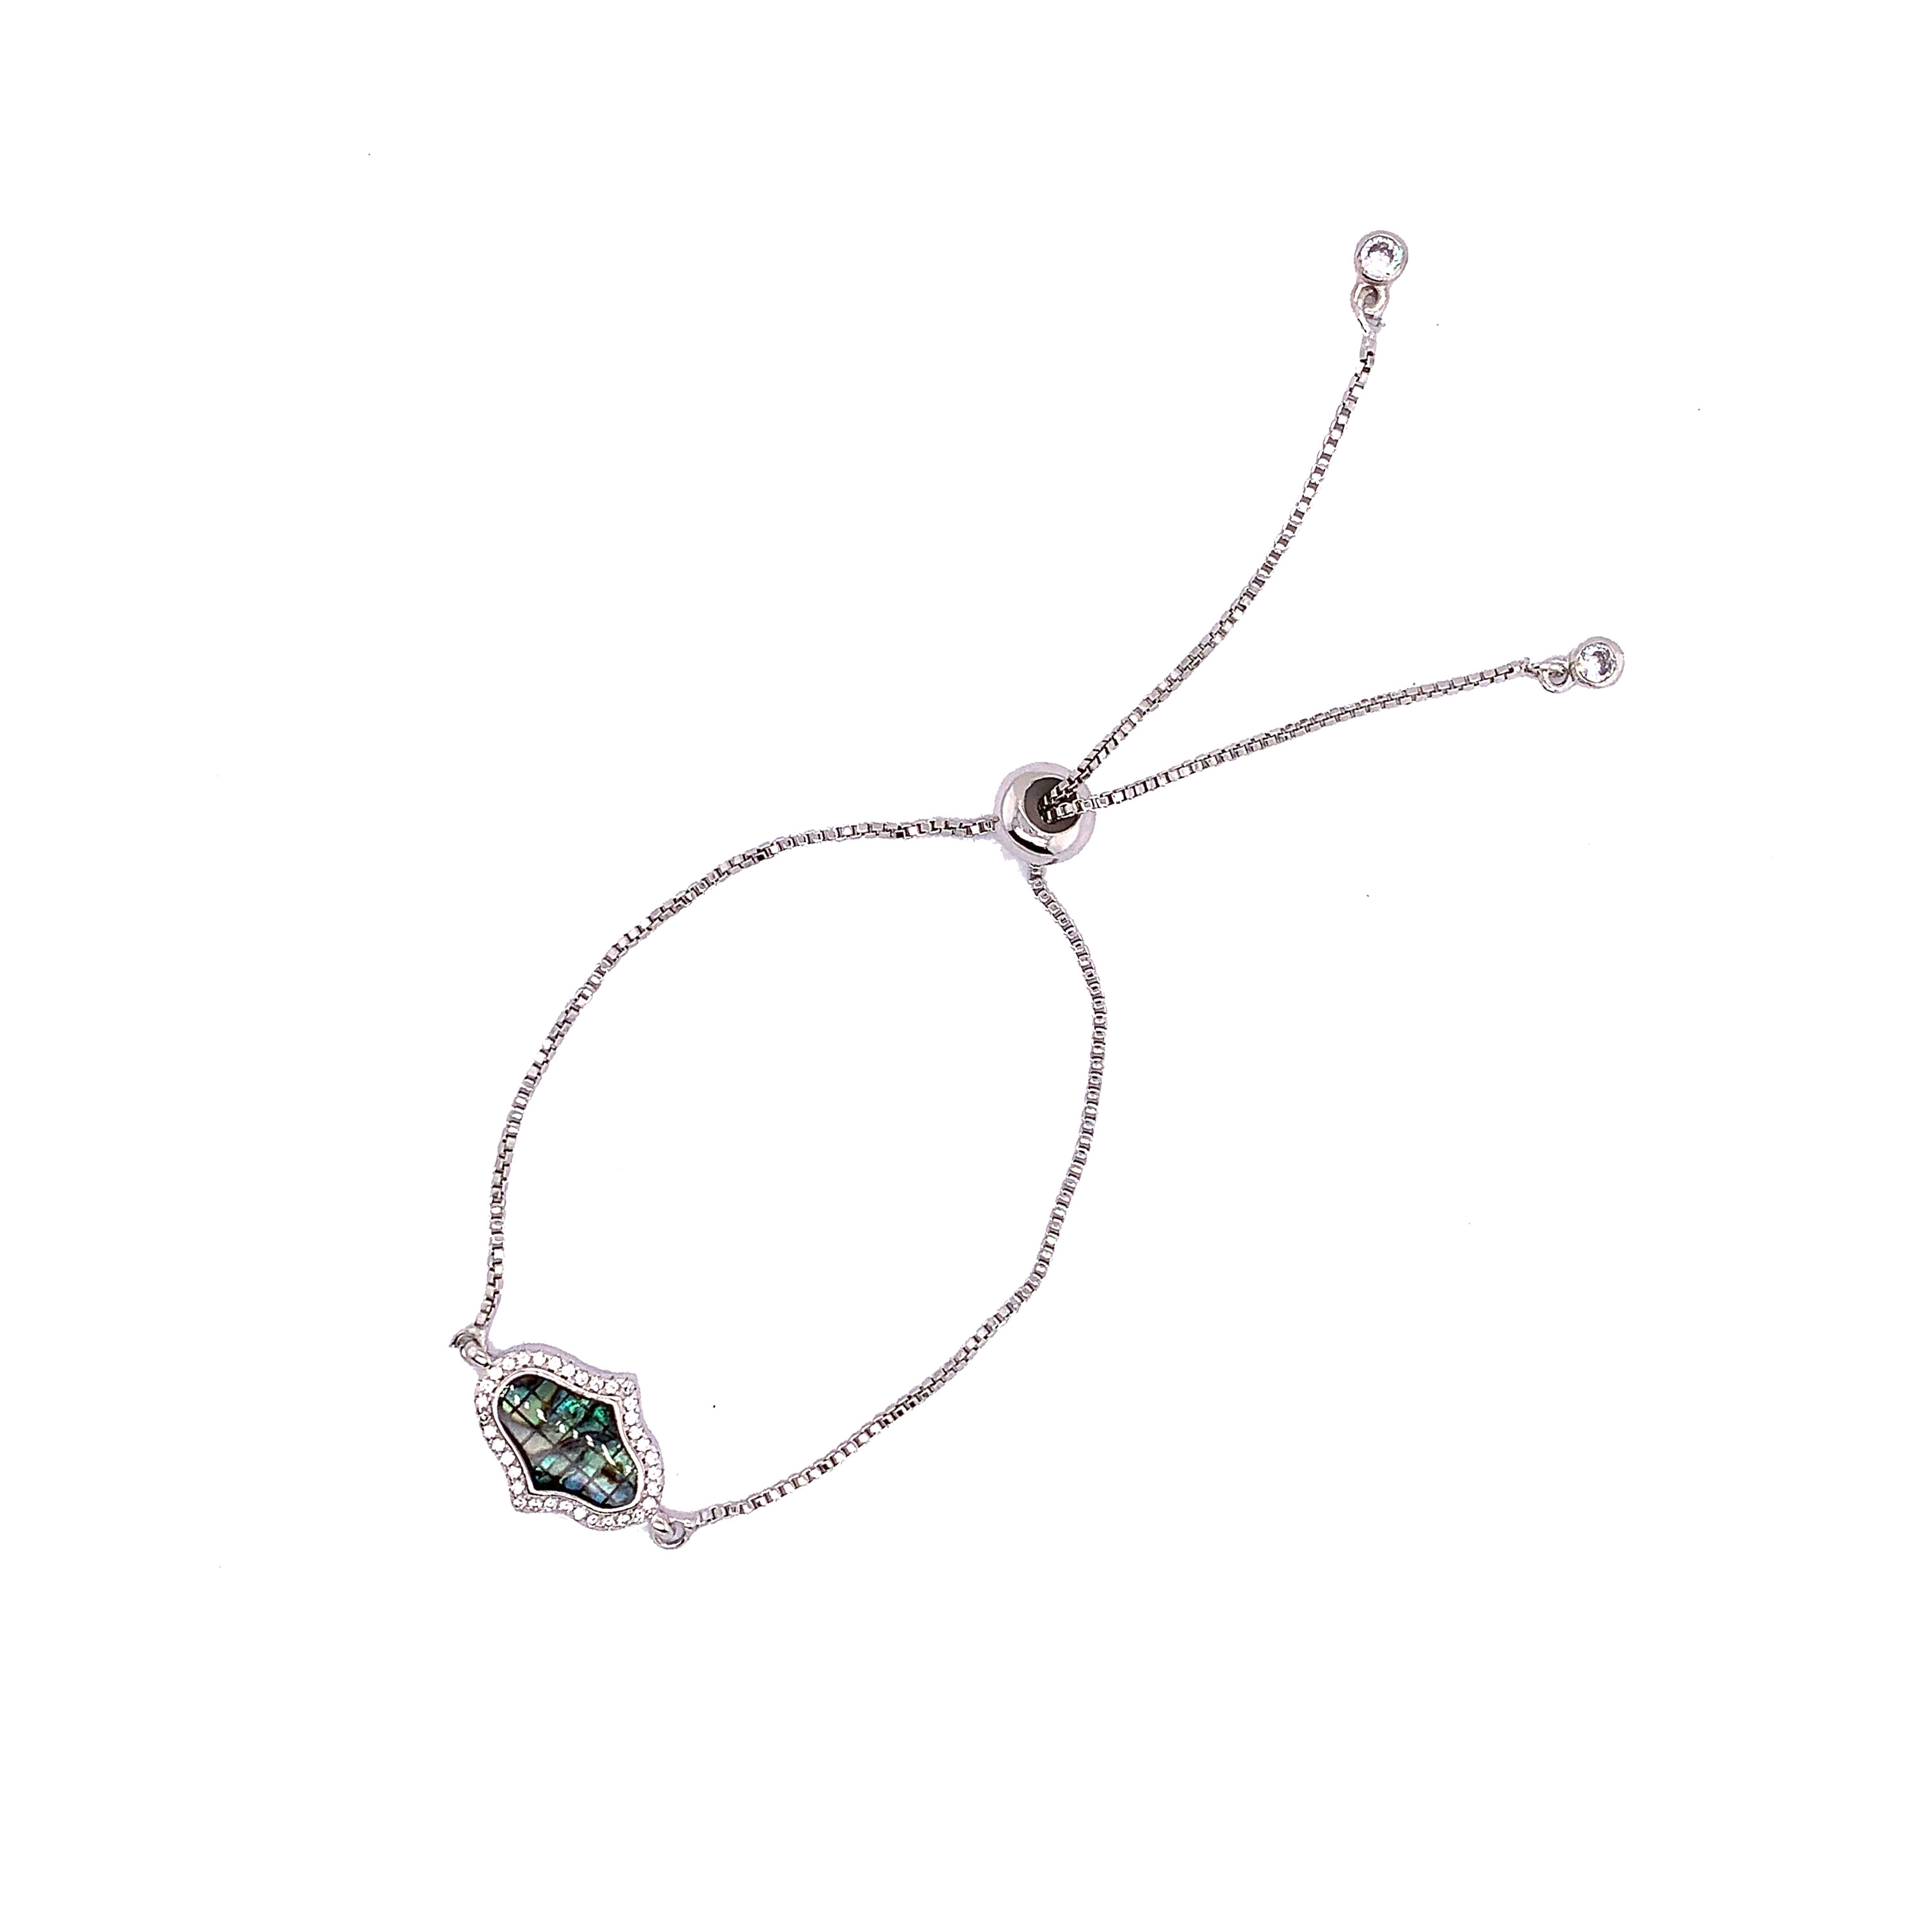 Adjustable Bracelet with Abalone Hamsa Charm - Silver Plated